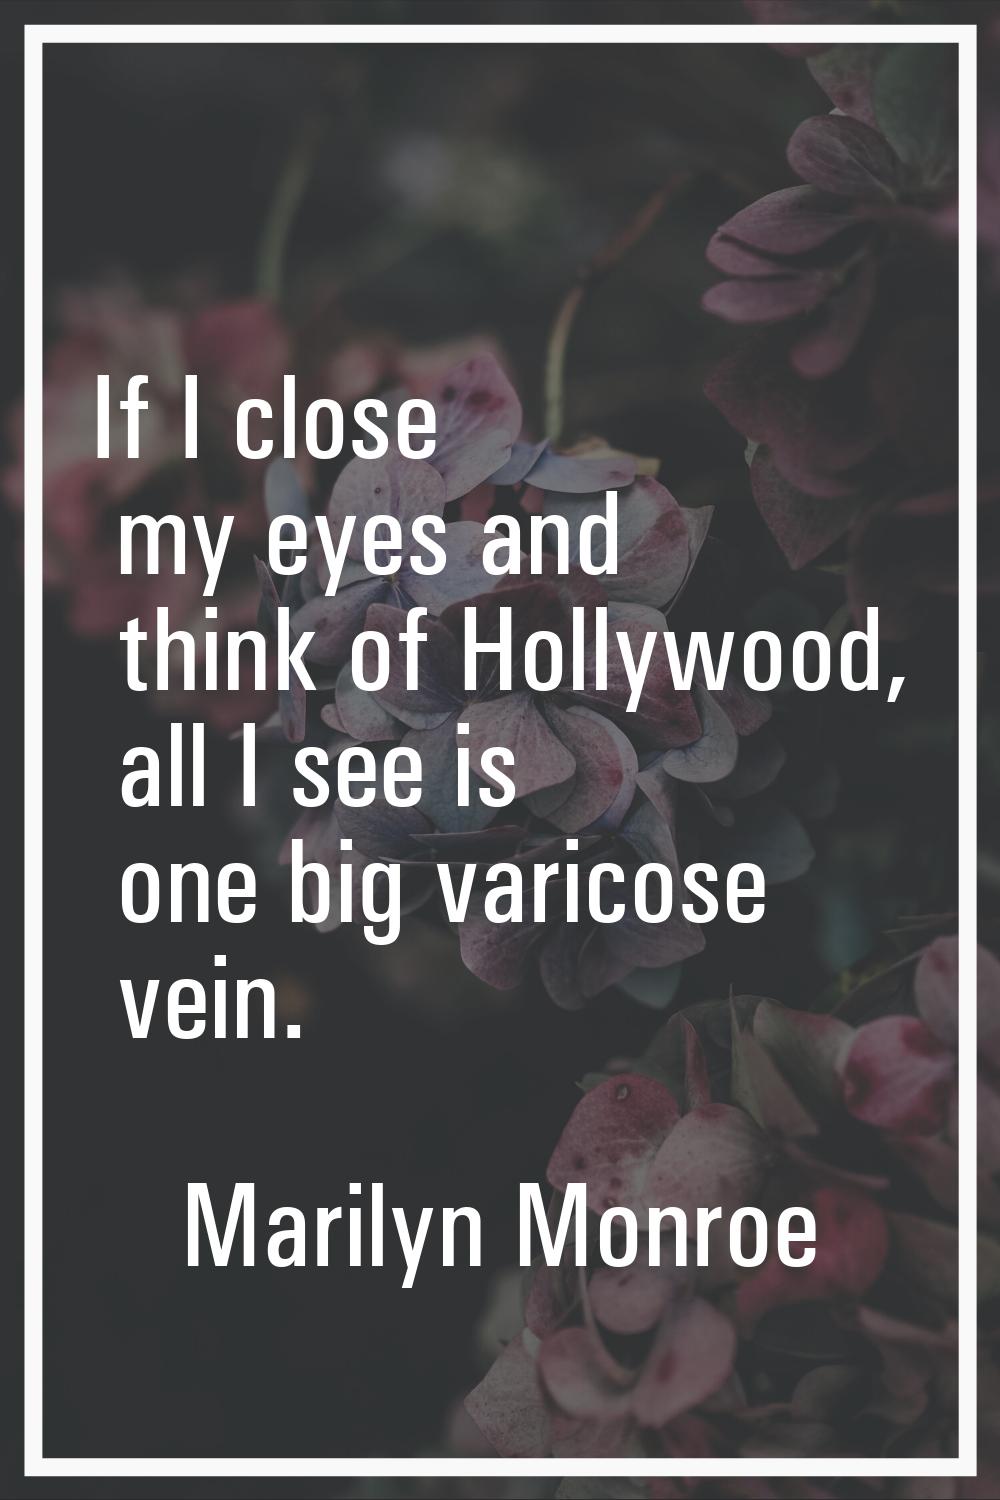 If I close my eyes and think of Hollywood, all I see is one big varicose vein.